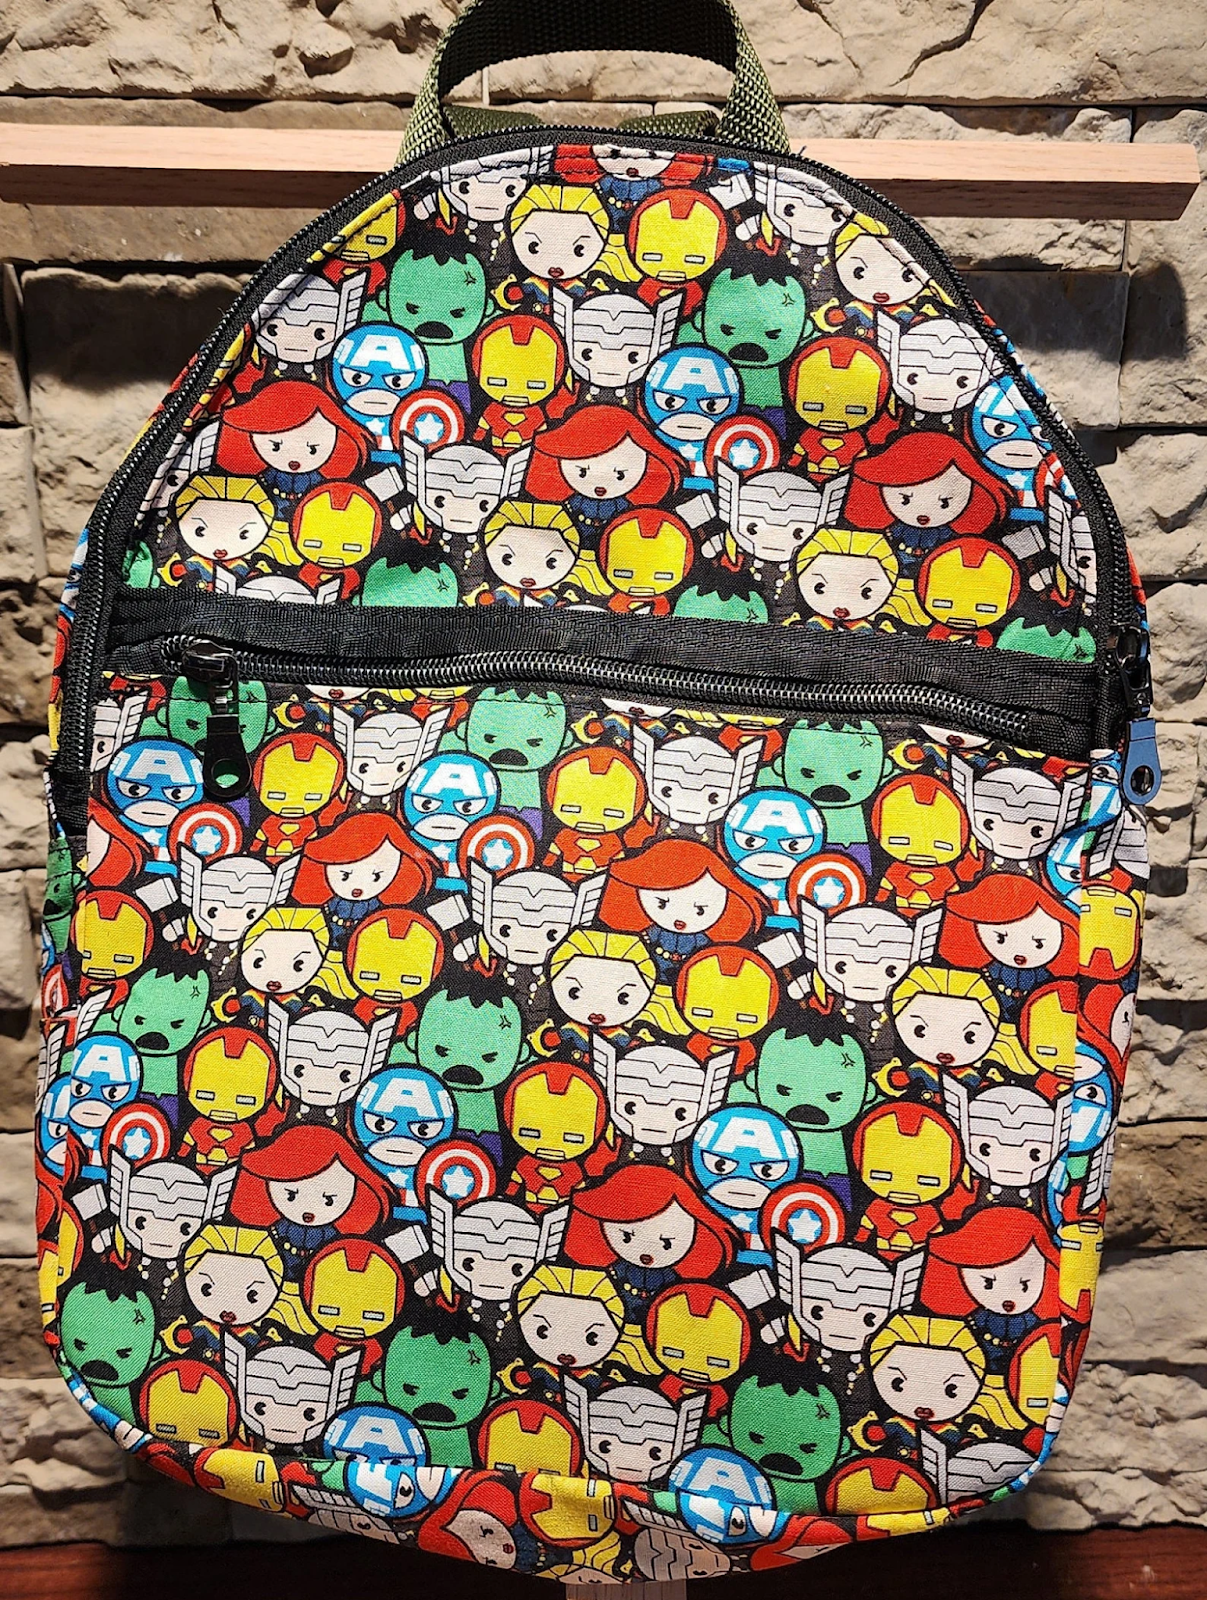 A backpack showing chibi versions of several Marvel superheroes such as Thor, Iron Man, the Hulk and so on